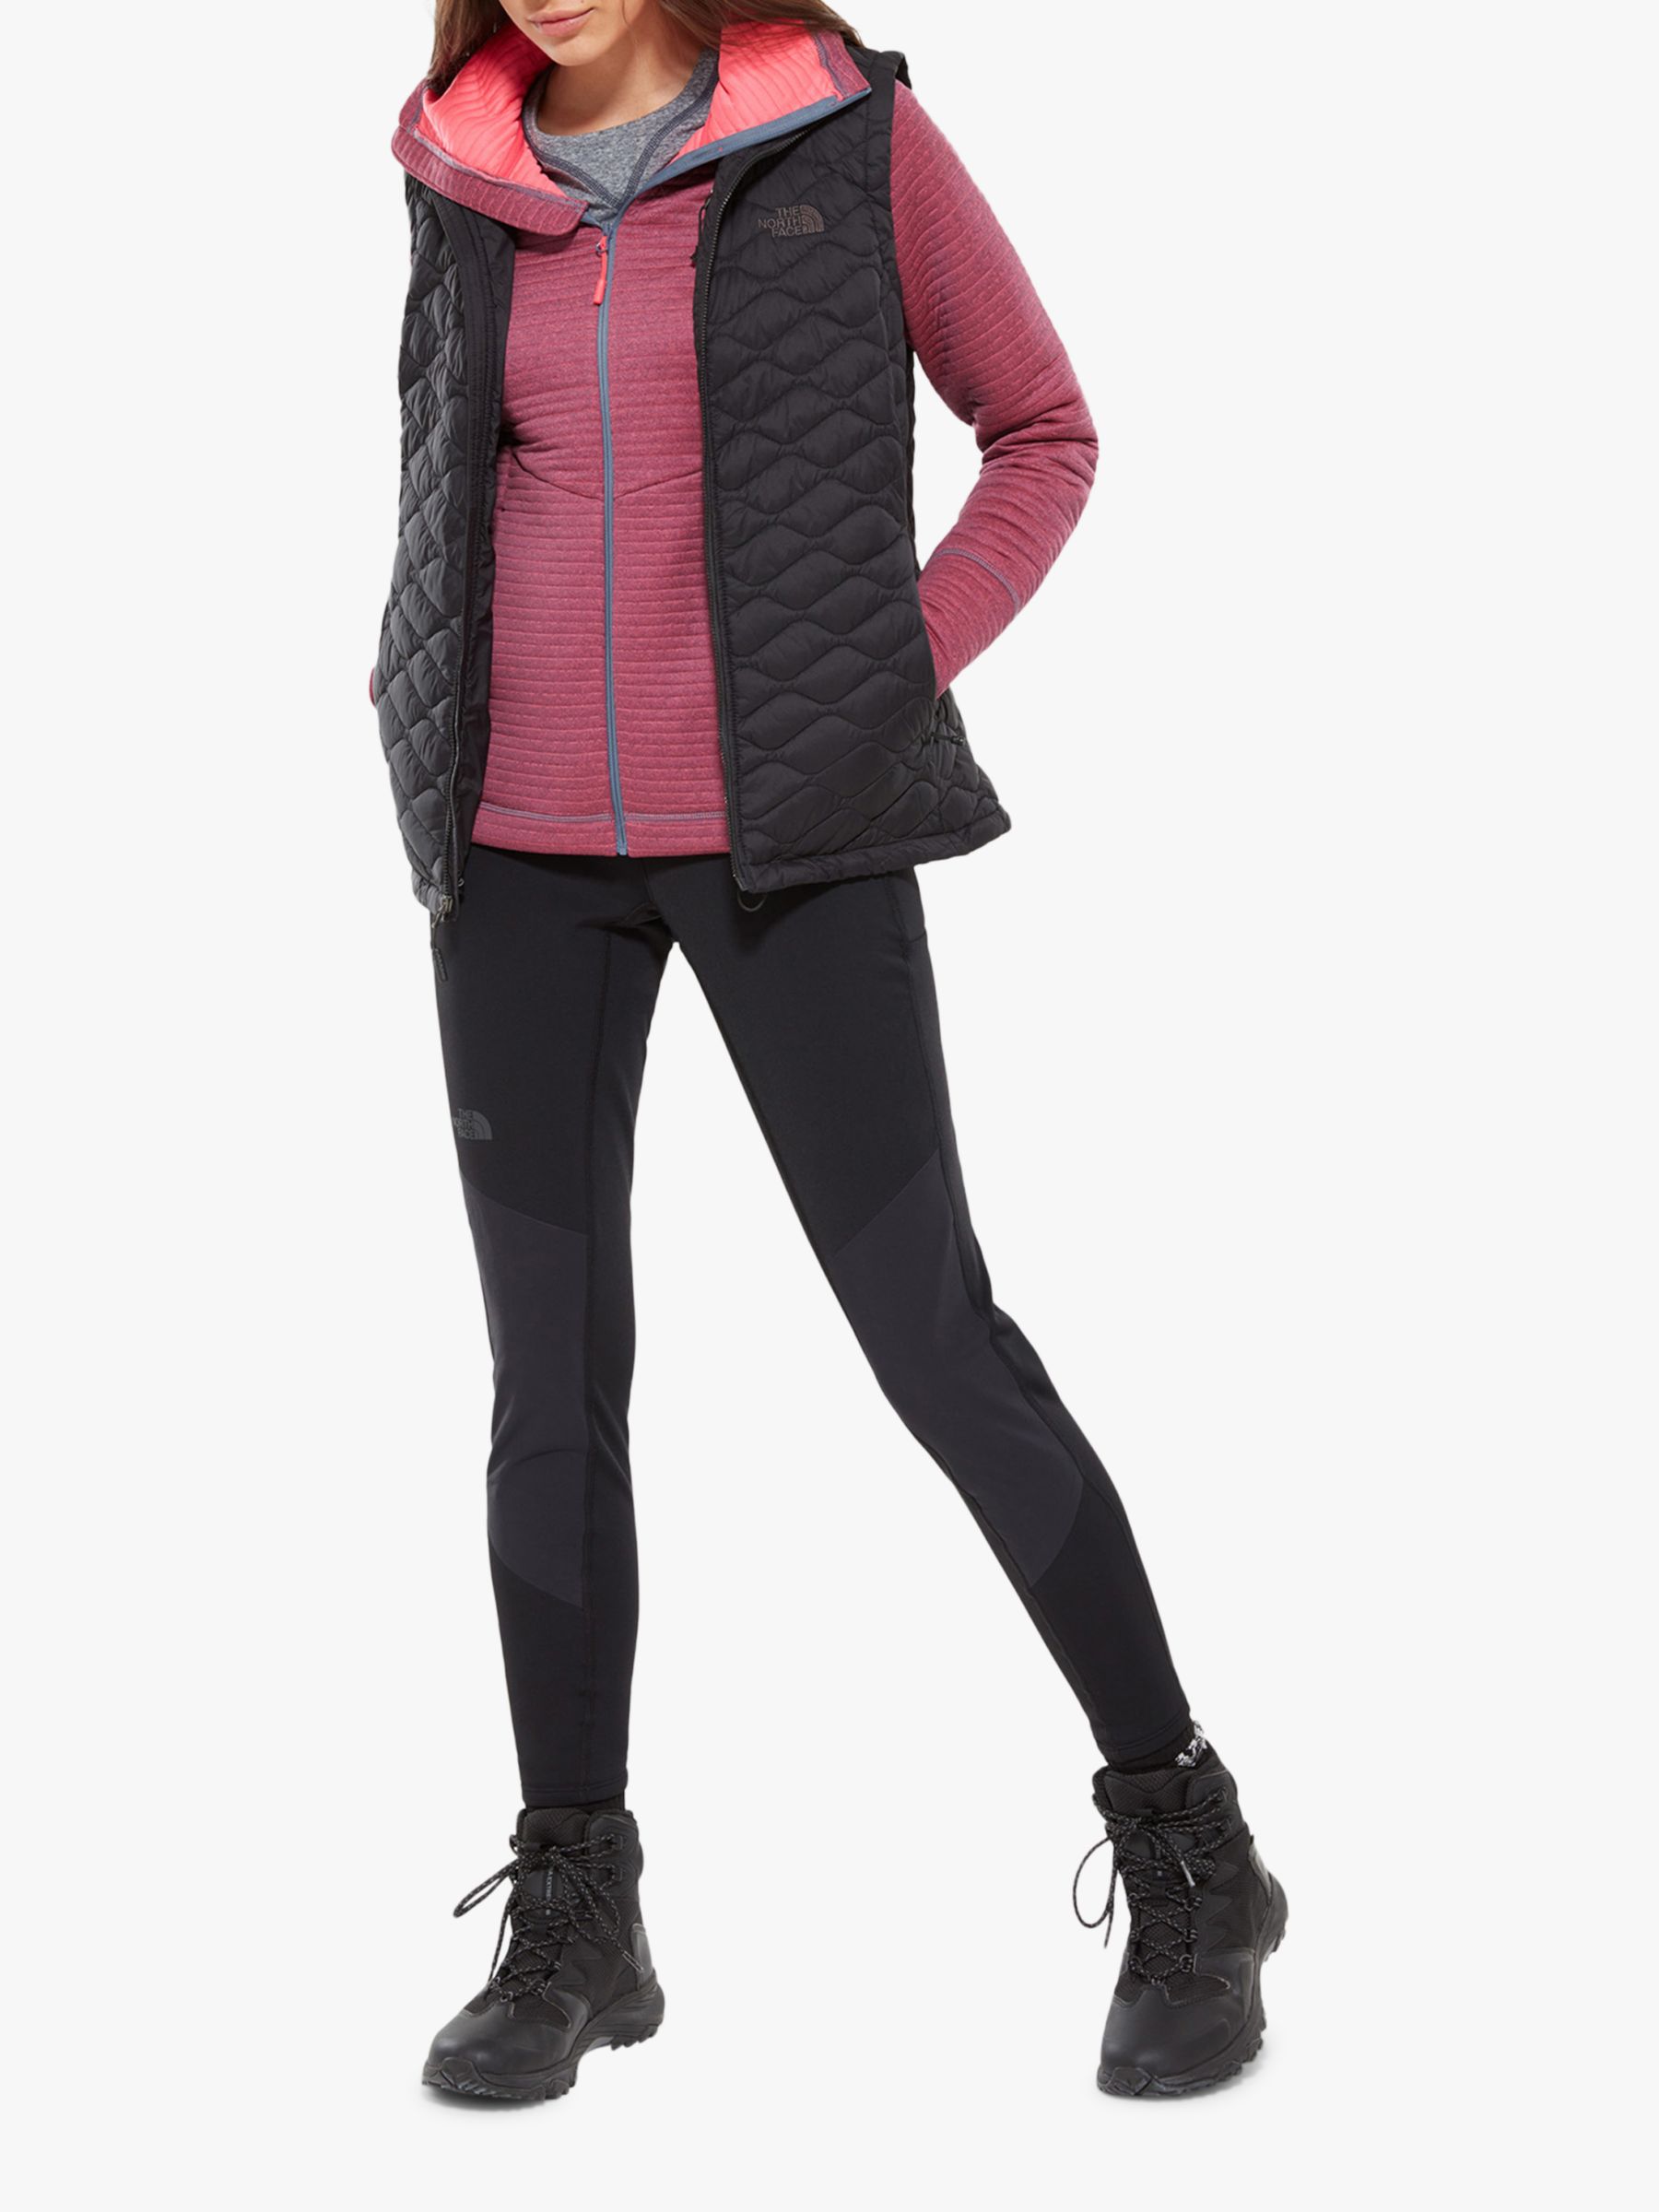 north face thermoball gilet womens